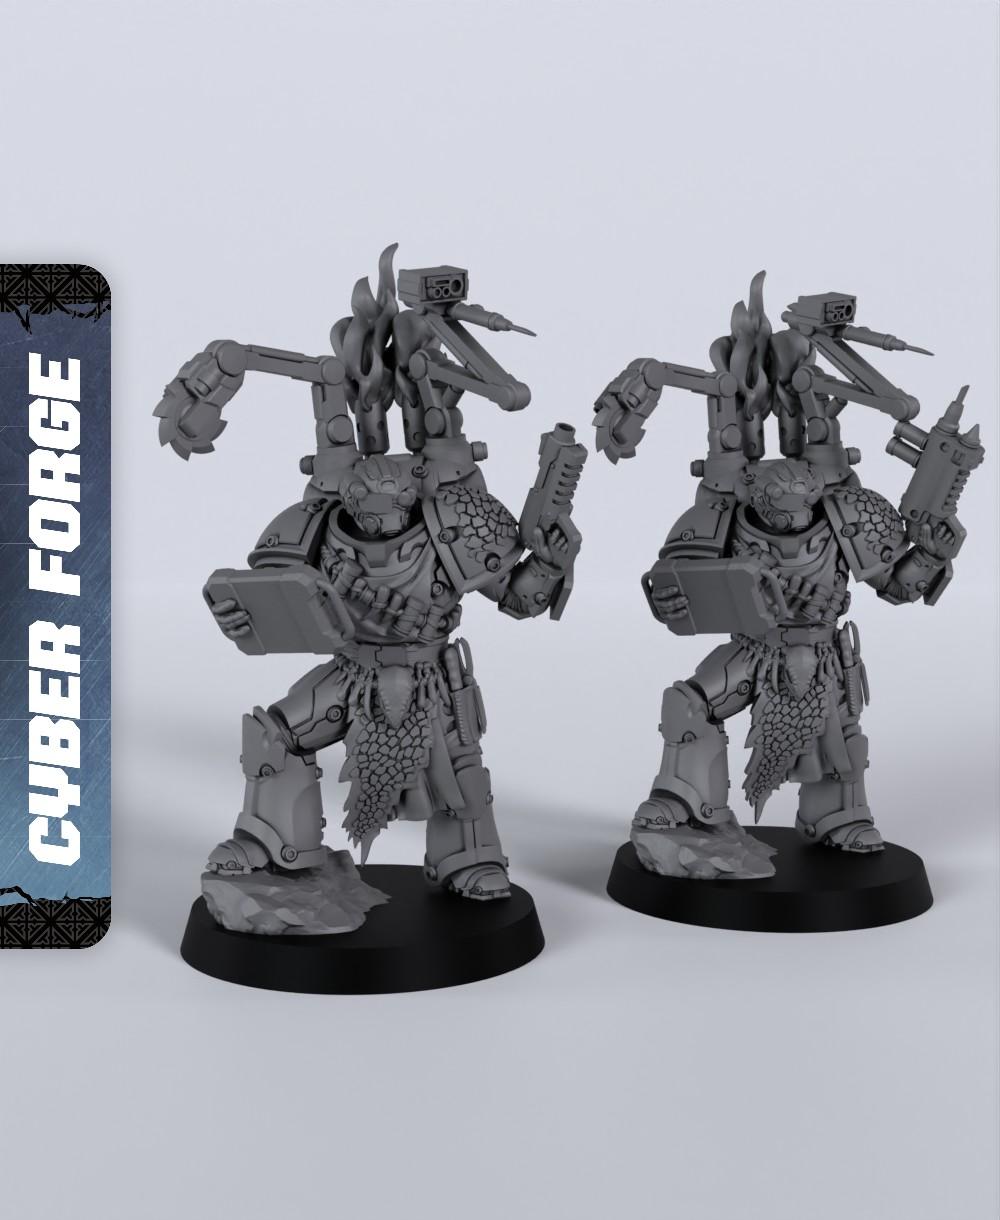 Battle Medic - With Free Cyberpunk Warhammer - 40k Sci-Fi Gift Ideas for RPG and Wargamers 3d model